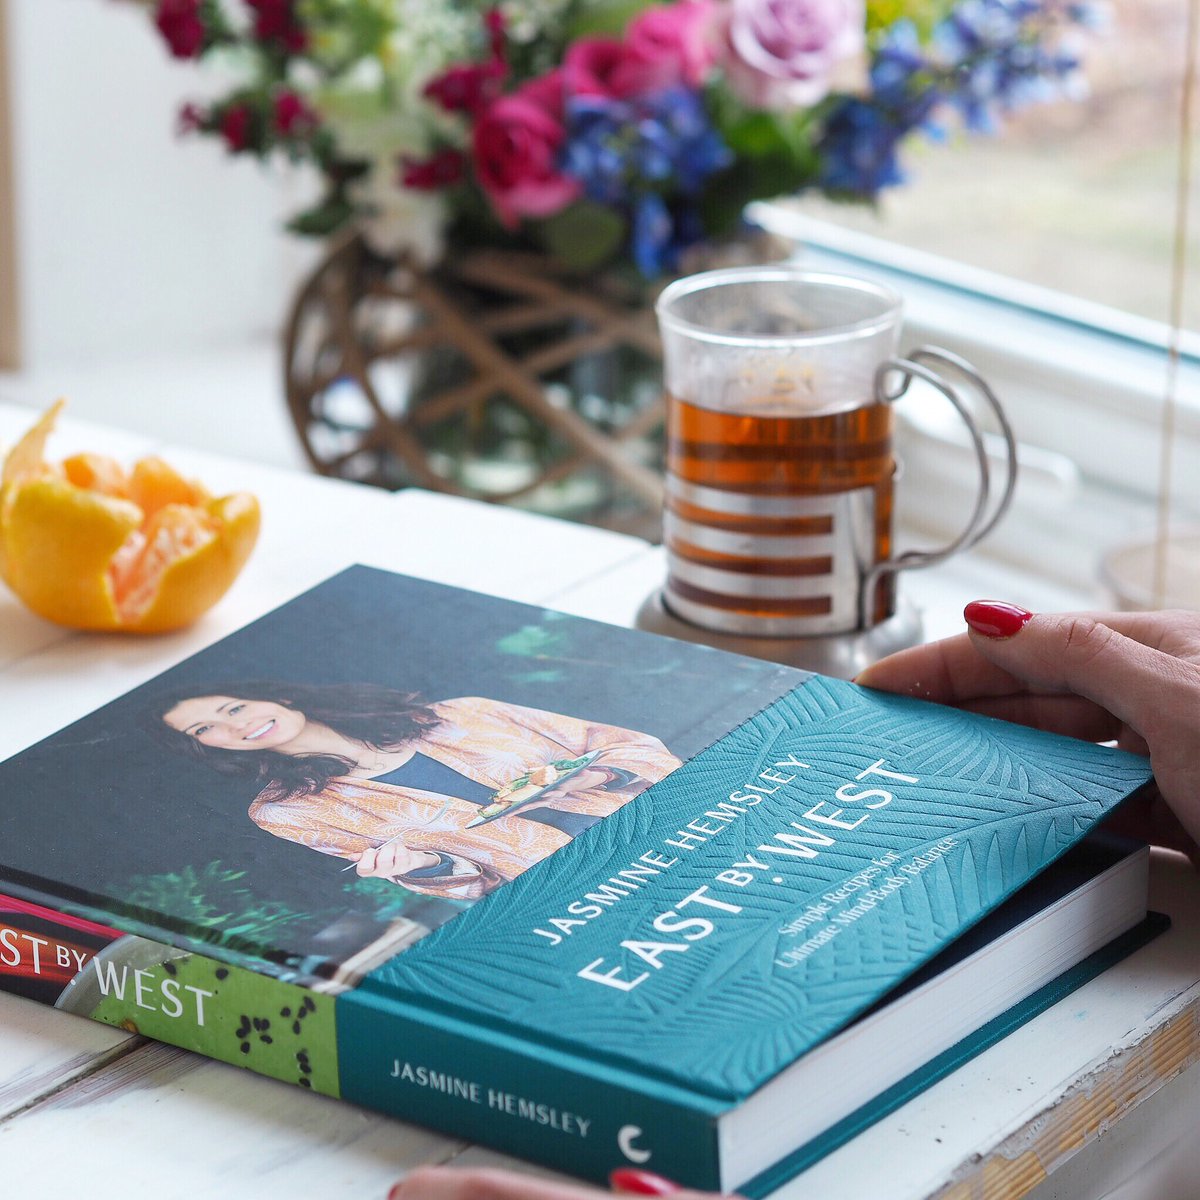 #Giveaway 🎉 Head over to my insta to get your hands on @jasminehemsley new book #EastByWest